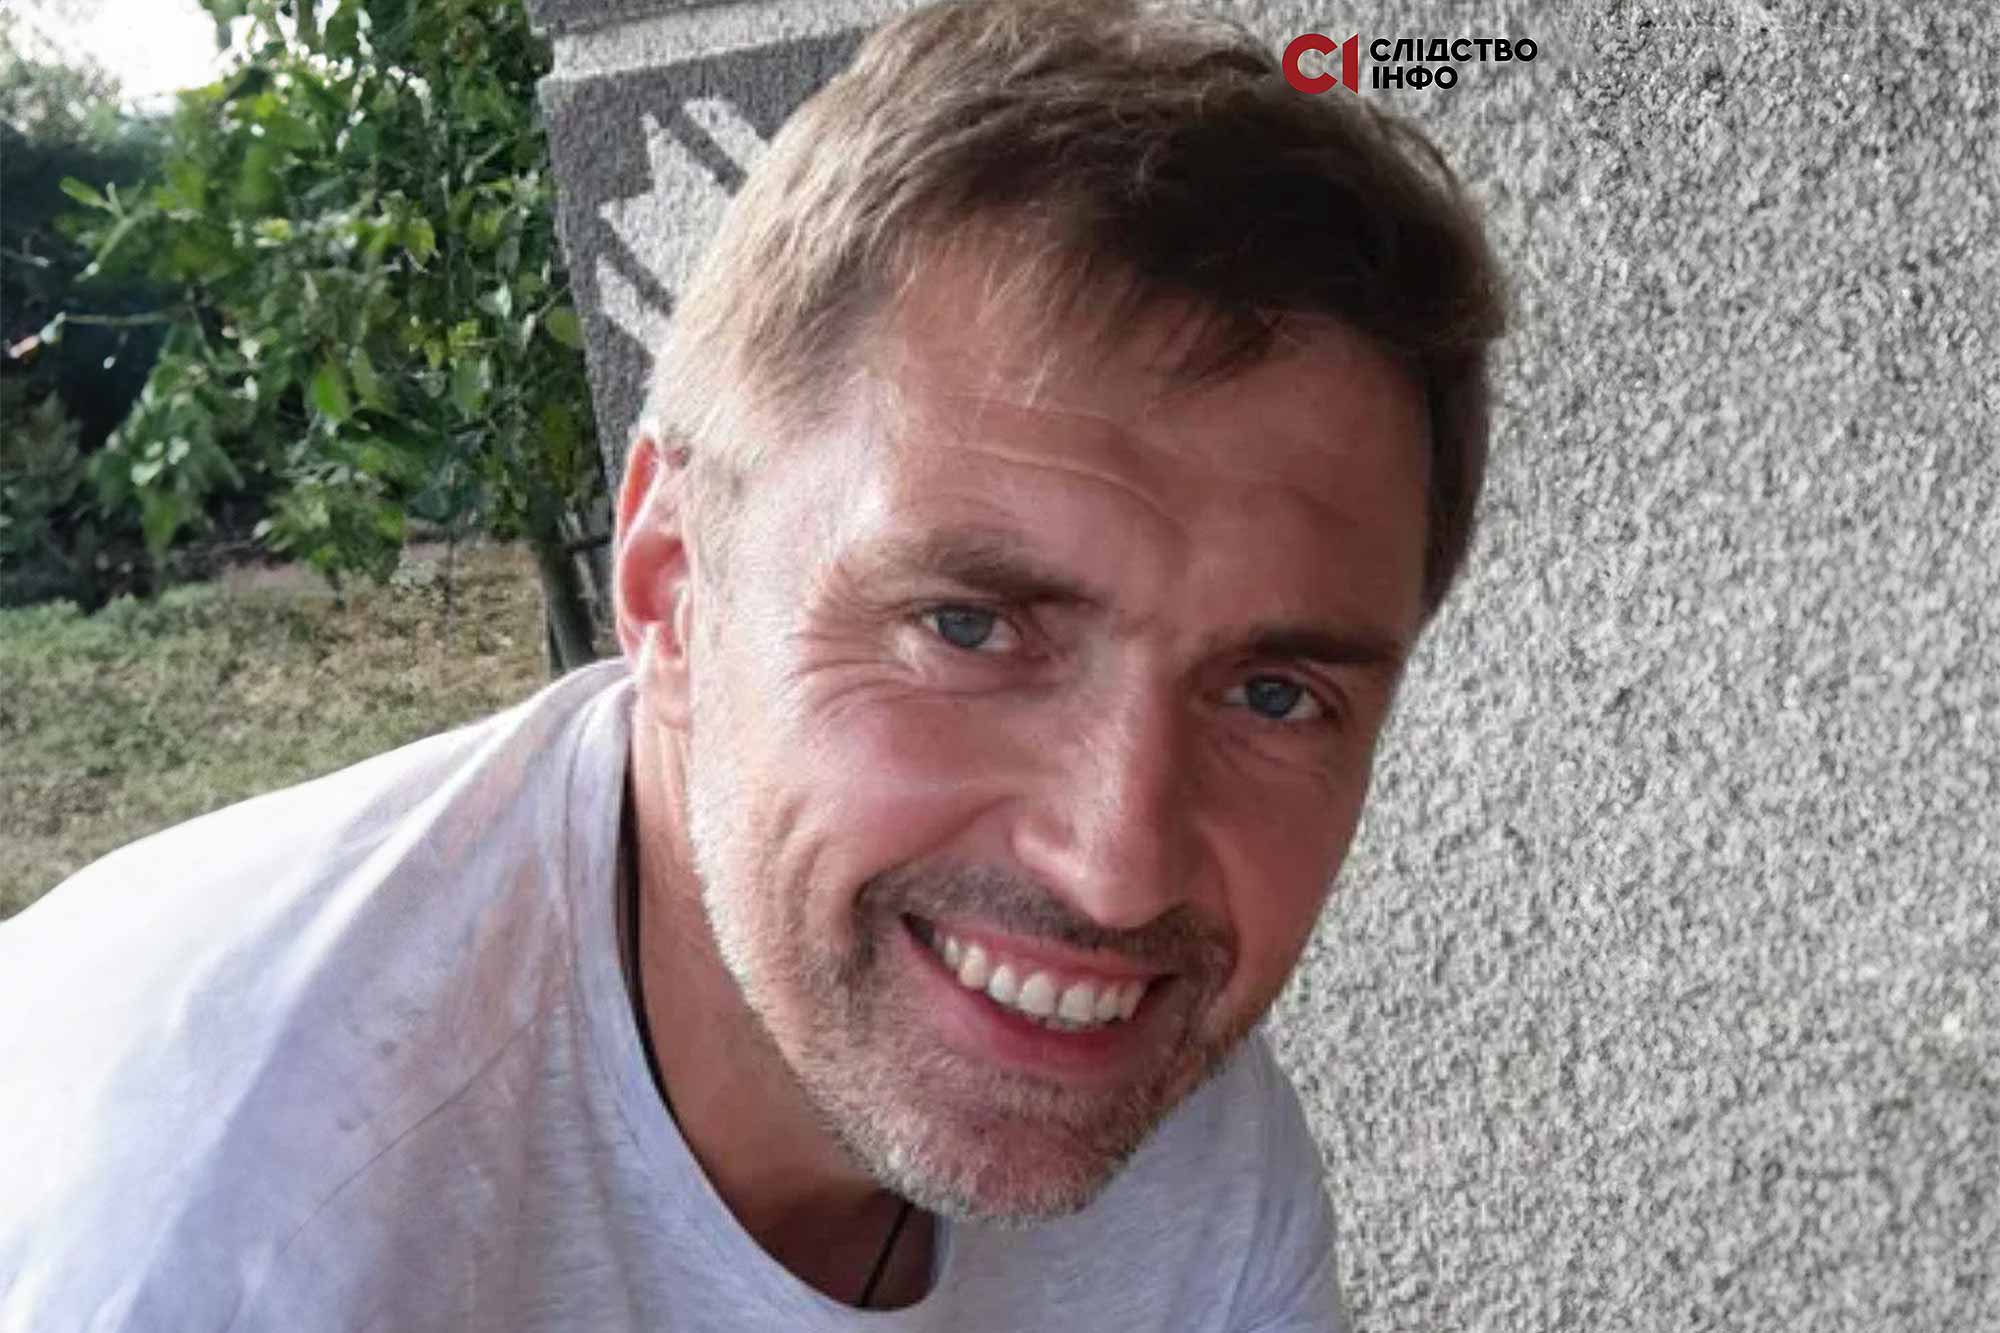 On March 2, 2022, Sayan Ilyarov and his accomplice, identified as 26-year-old private Linchobo Naidanov, reportedly shot and killed Vasyl Avdeev (pictured), a resident of Berezivka. © Slidstvo.Info